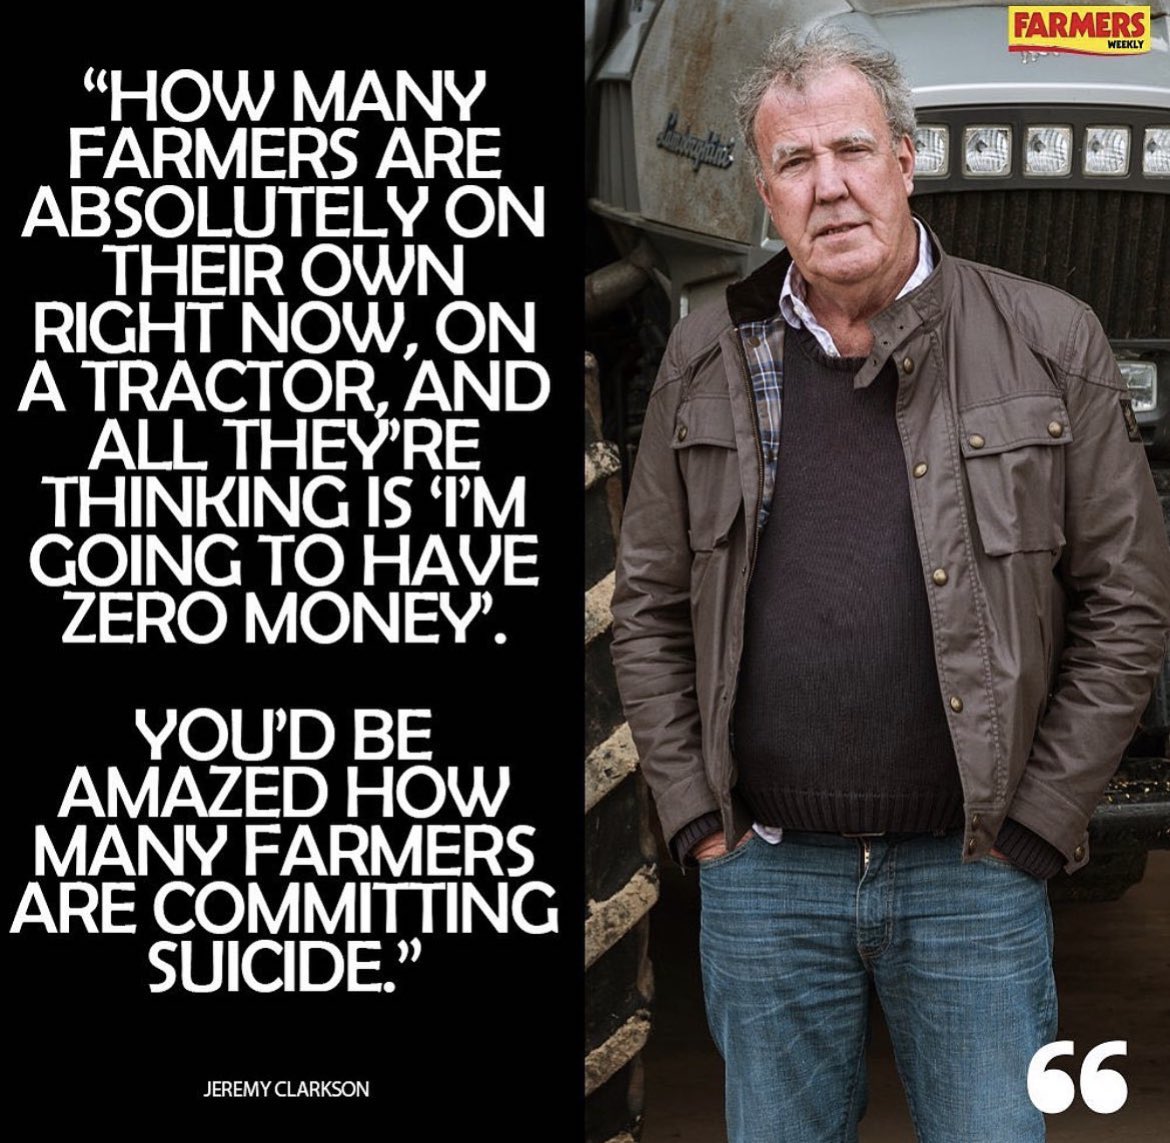 Three people in the UK farming and agricultural industry die by suicide every week, according to the British Association for Counselling and Psychotherapy (BACP).